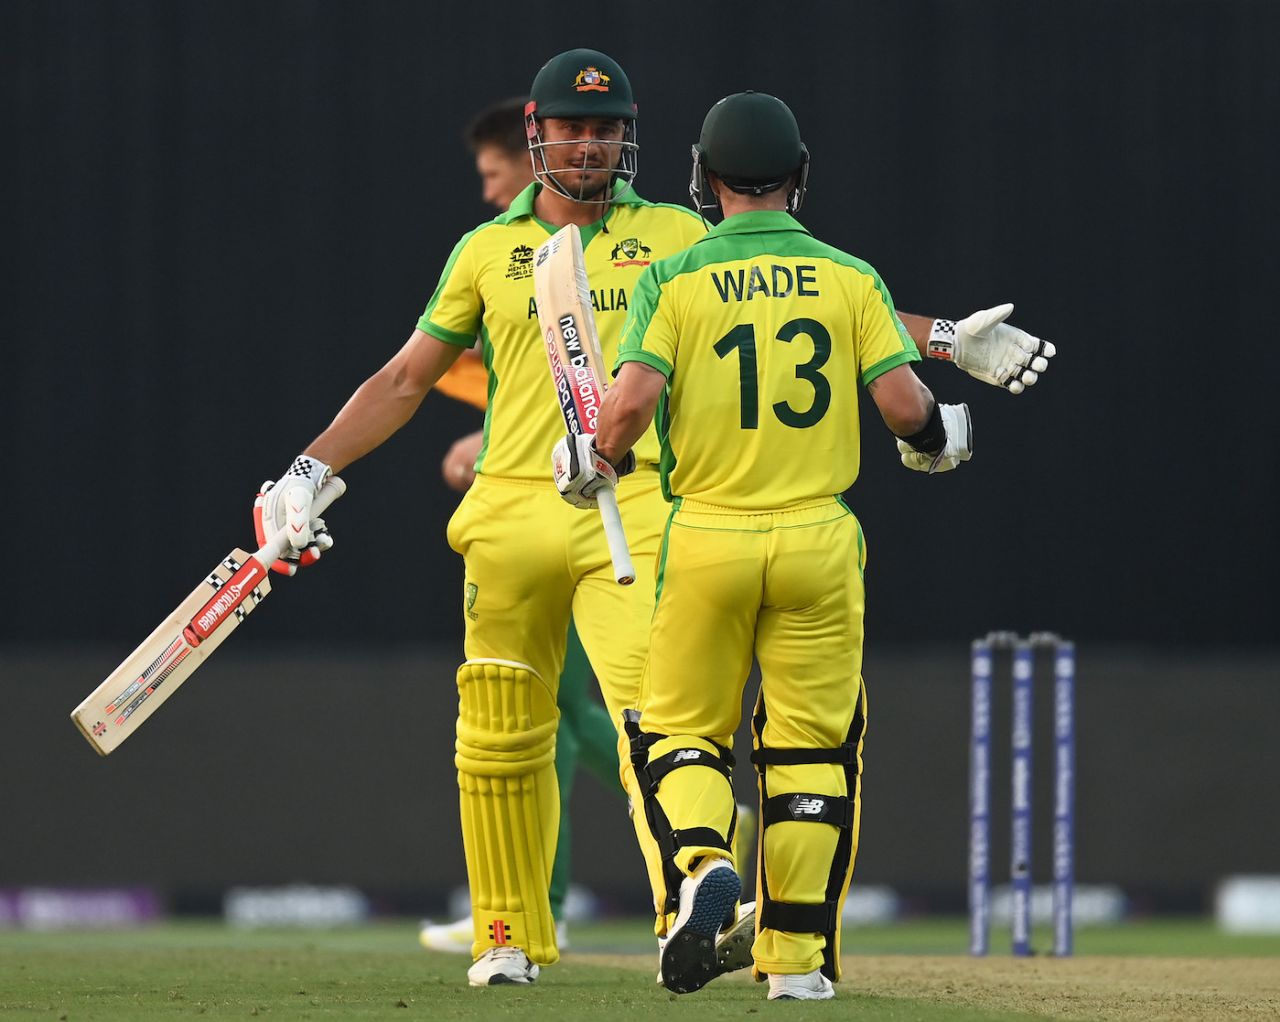 Marcus Stoinis and Matthew Wade celebrate after the winning runs were scored, Australia vs South Africa, T20 World Cup, Abu Dhabi, October 23, 2021